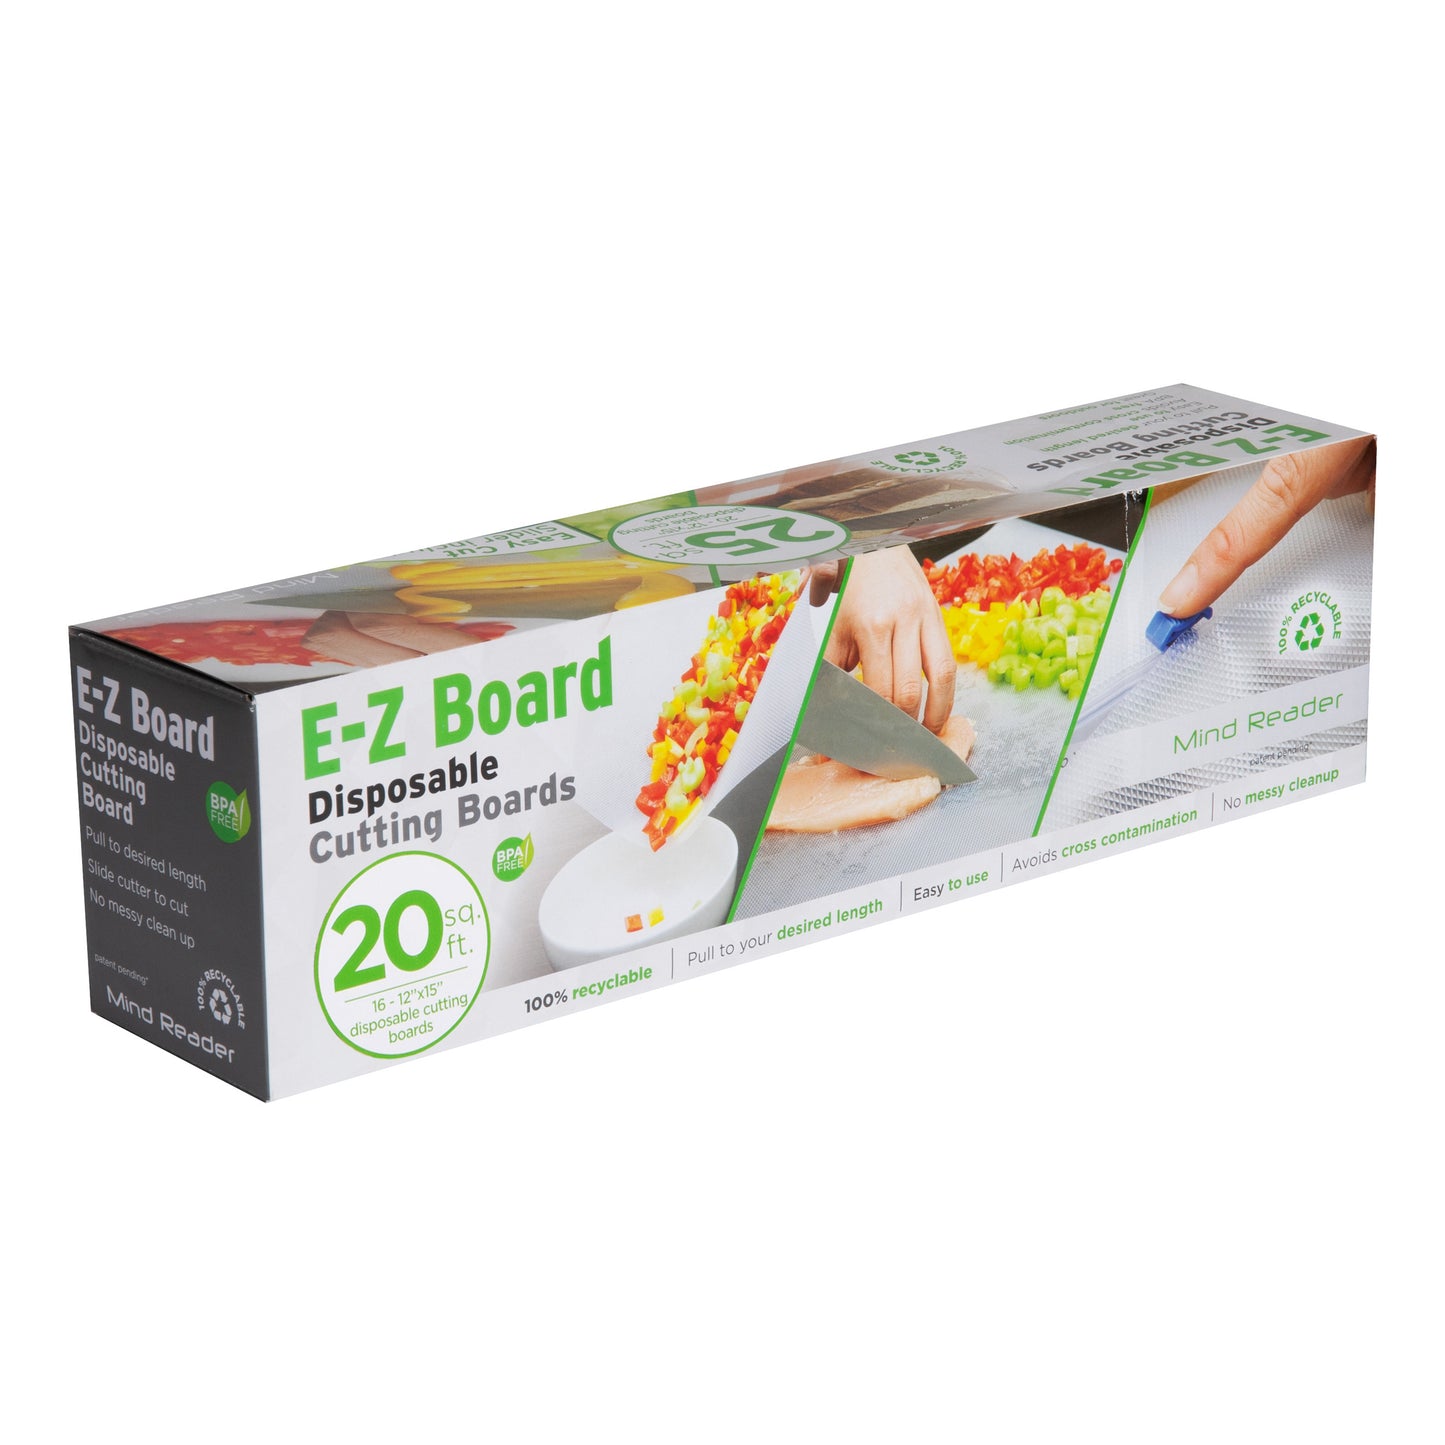 Mind Reader E-Z Board Disposable Plastic Cutting Board, 20 Square Feet, Easy Clean-Up and Convenient Use, Ideal for Camping, Hunting, Boating, and For People With Food Allergies, Clear